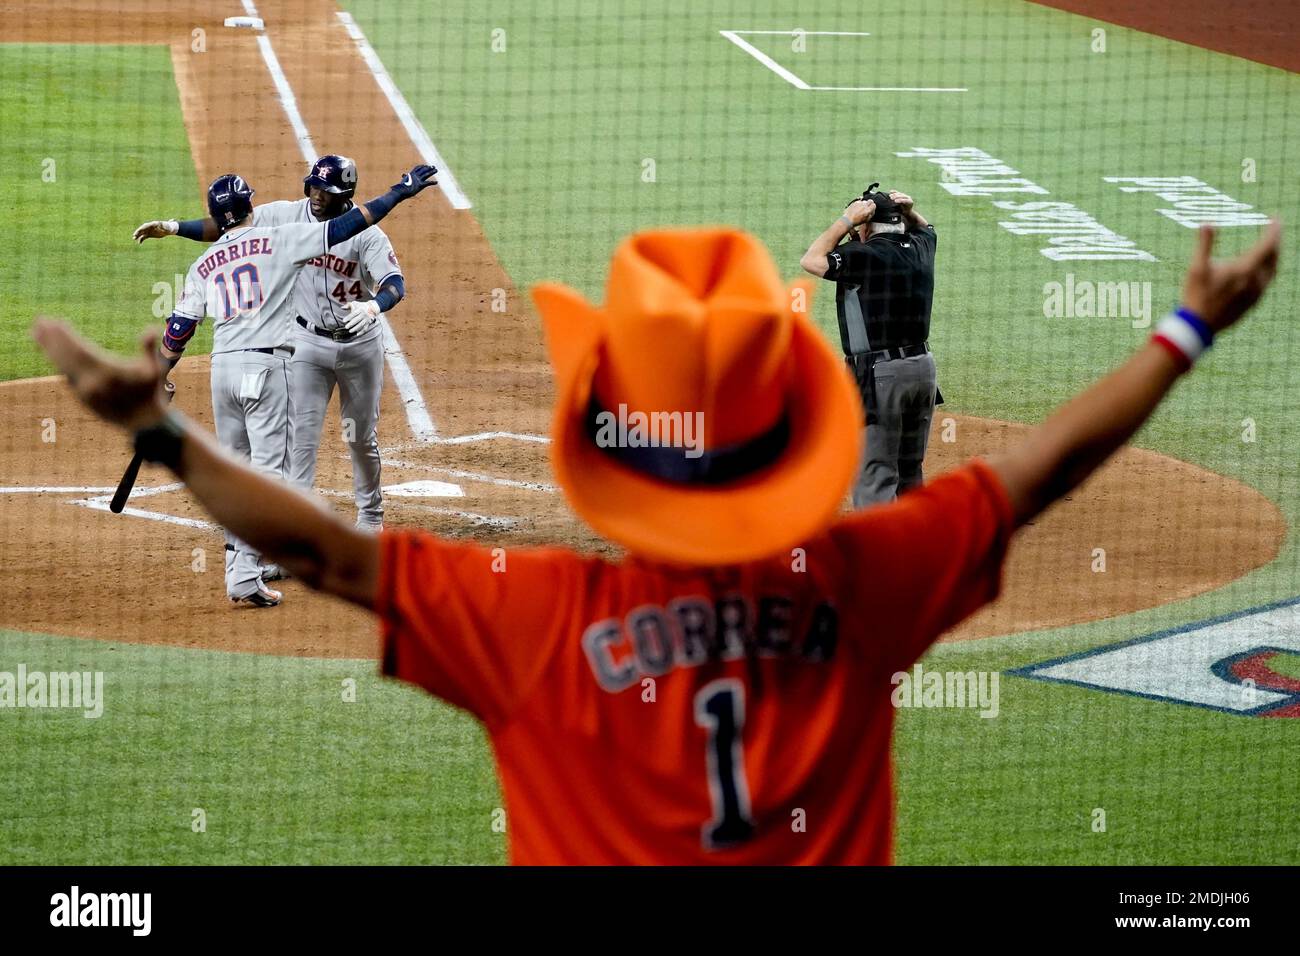 Houston Astros fan Mark McKee, of Beaumont, Texas, celebrates as he watches  the Astros' Yuli Gurriel (10) congratulate Yordan Alvarez (44) on his  two-run home run as umpire Larry Vanover stands by